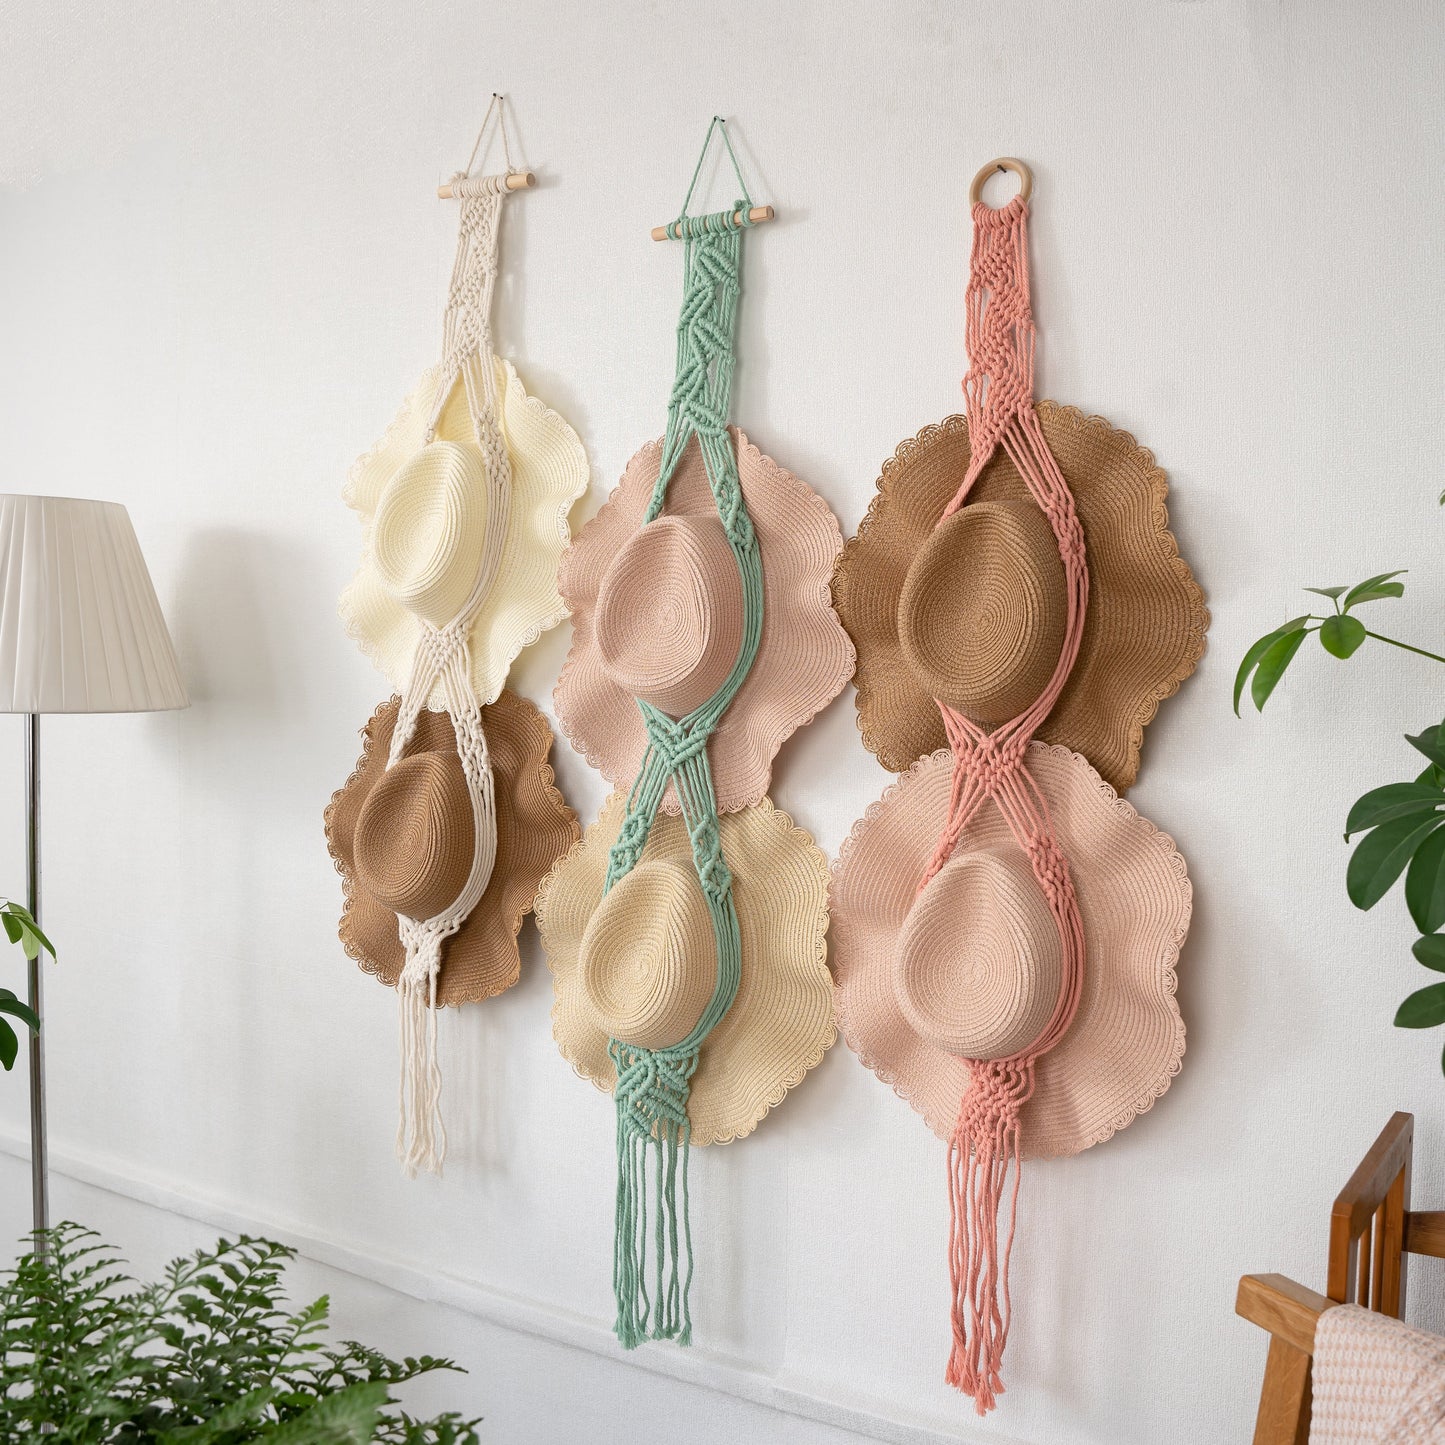 Leaf Macrame Wall Hanging for Hat Storage & Display Collection